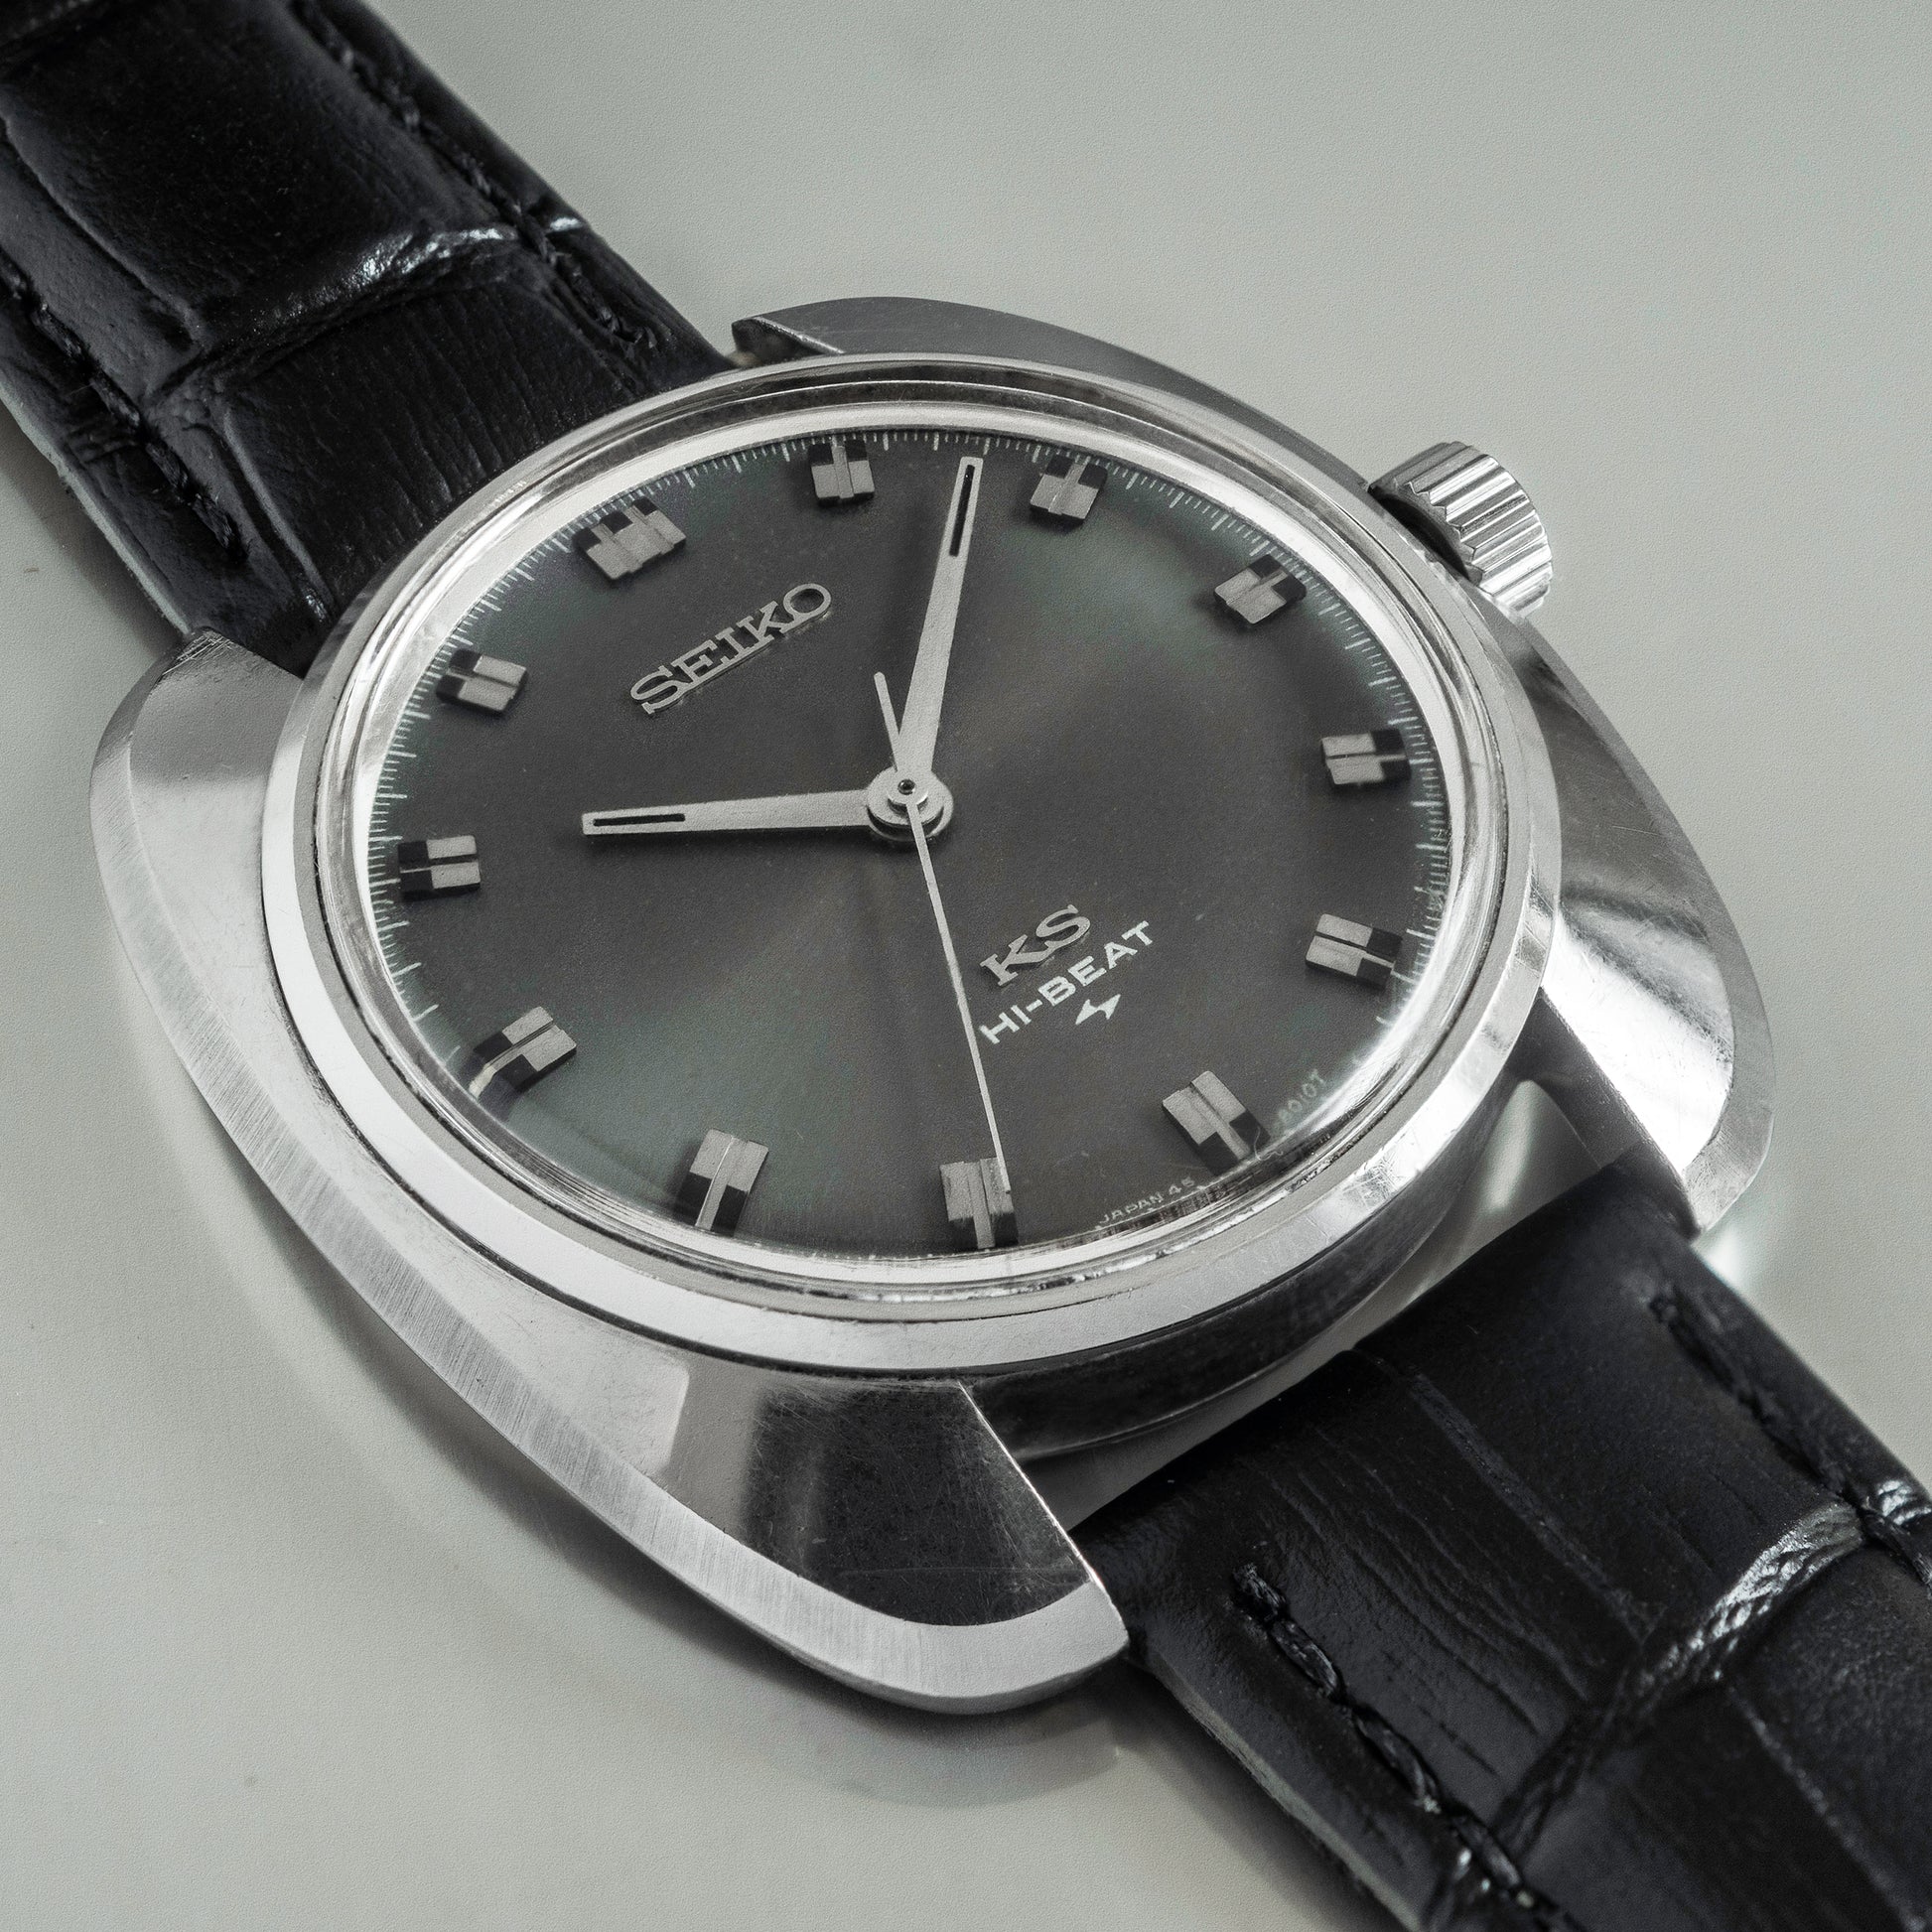 guiden Barbermaskine Forladt No. 638 / King Seiko 45KS Hi-Beat - 1969 – From Time To Times